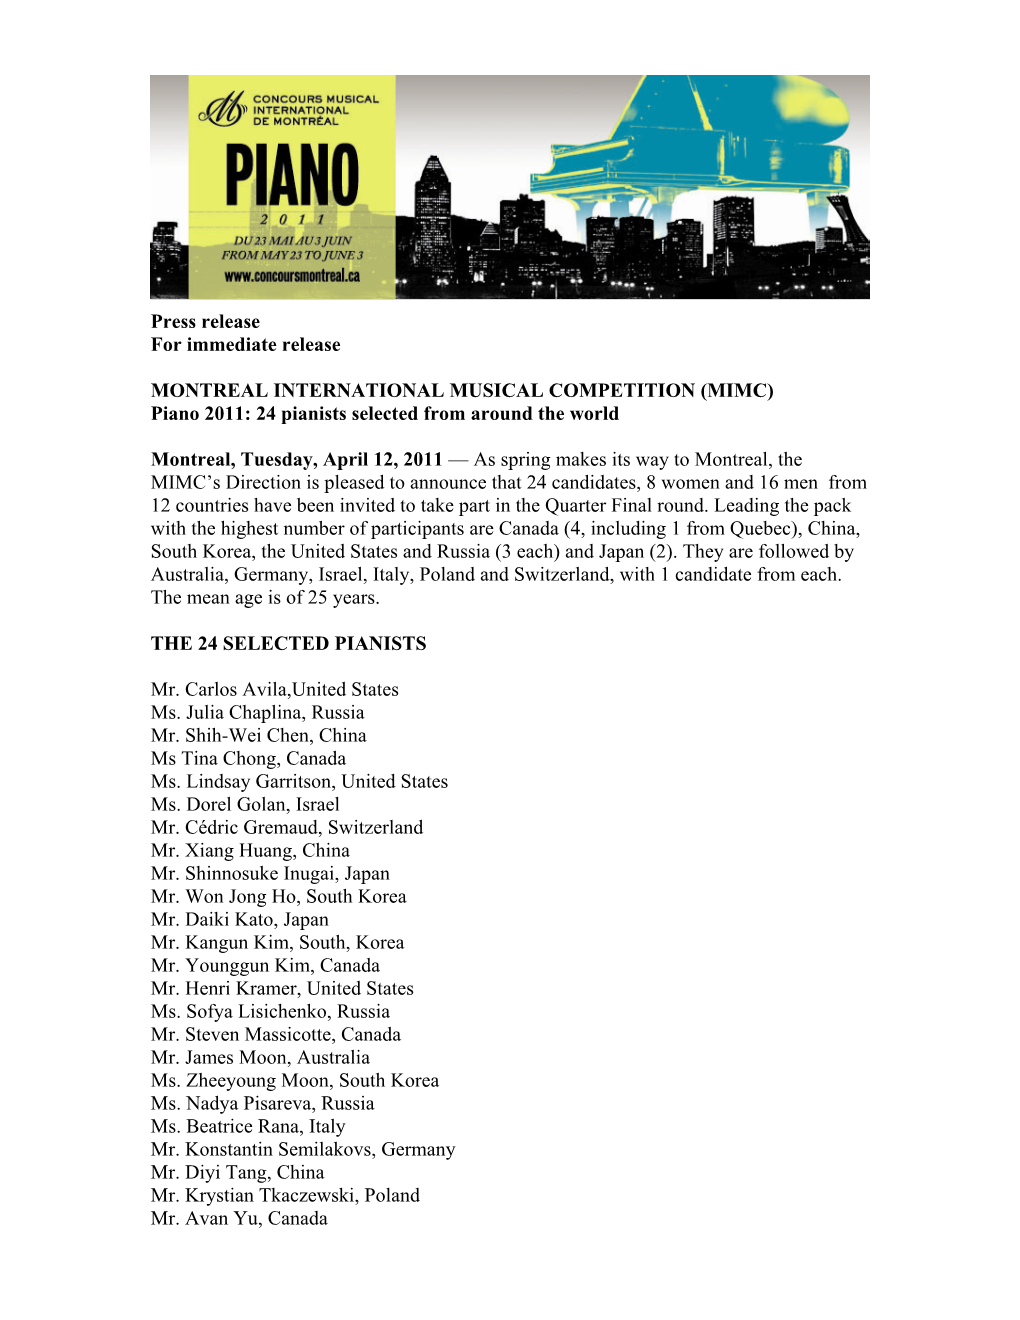 (MIMC) Piano 2011: 24 Pianists Selected from Around the World